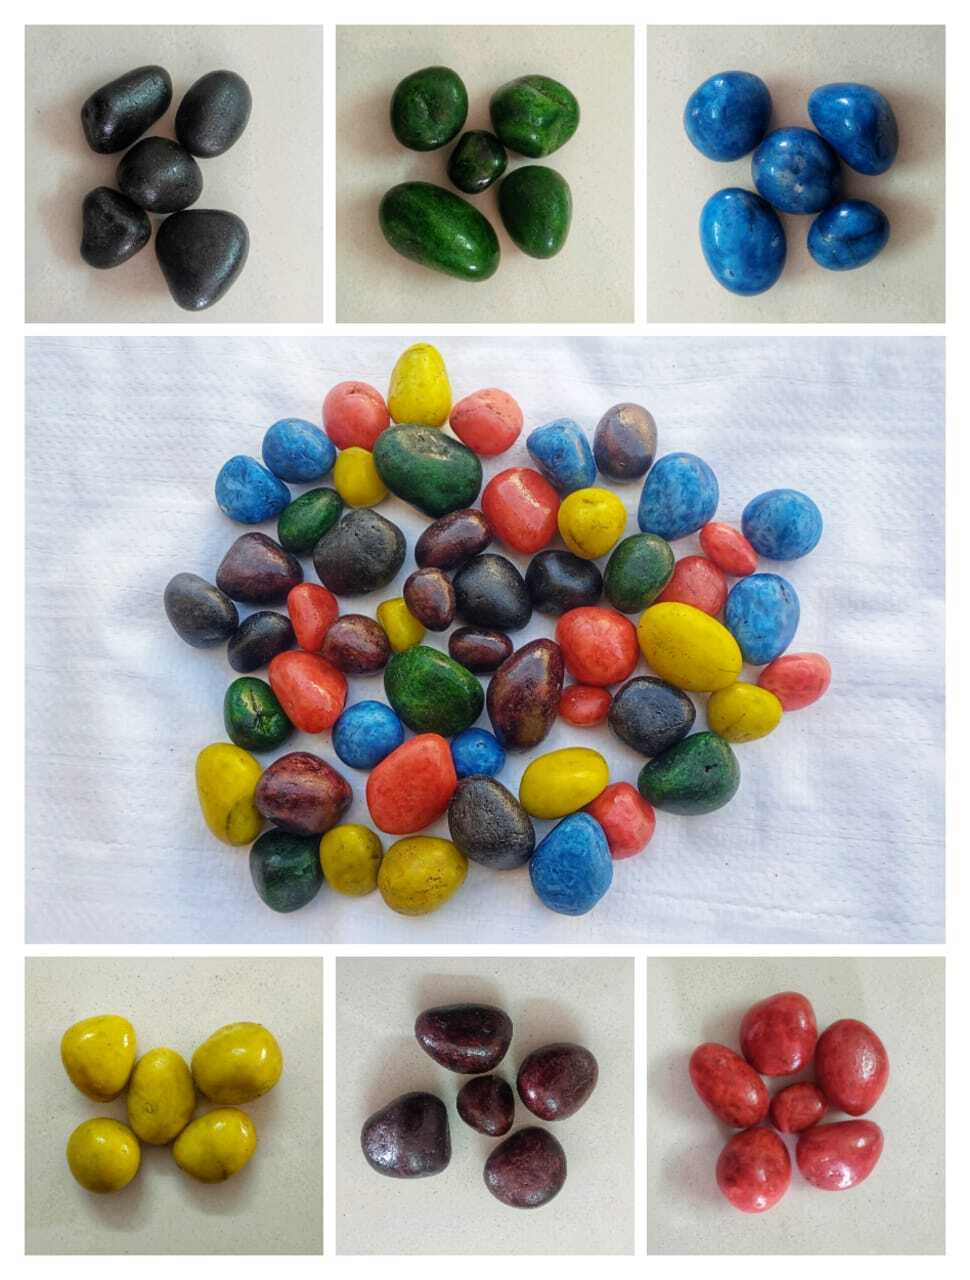 natural river stone round and smooth color coated black and green polished pebbles 15-30 mm decotation home office garden